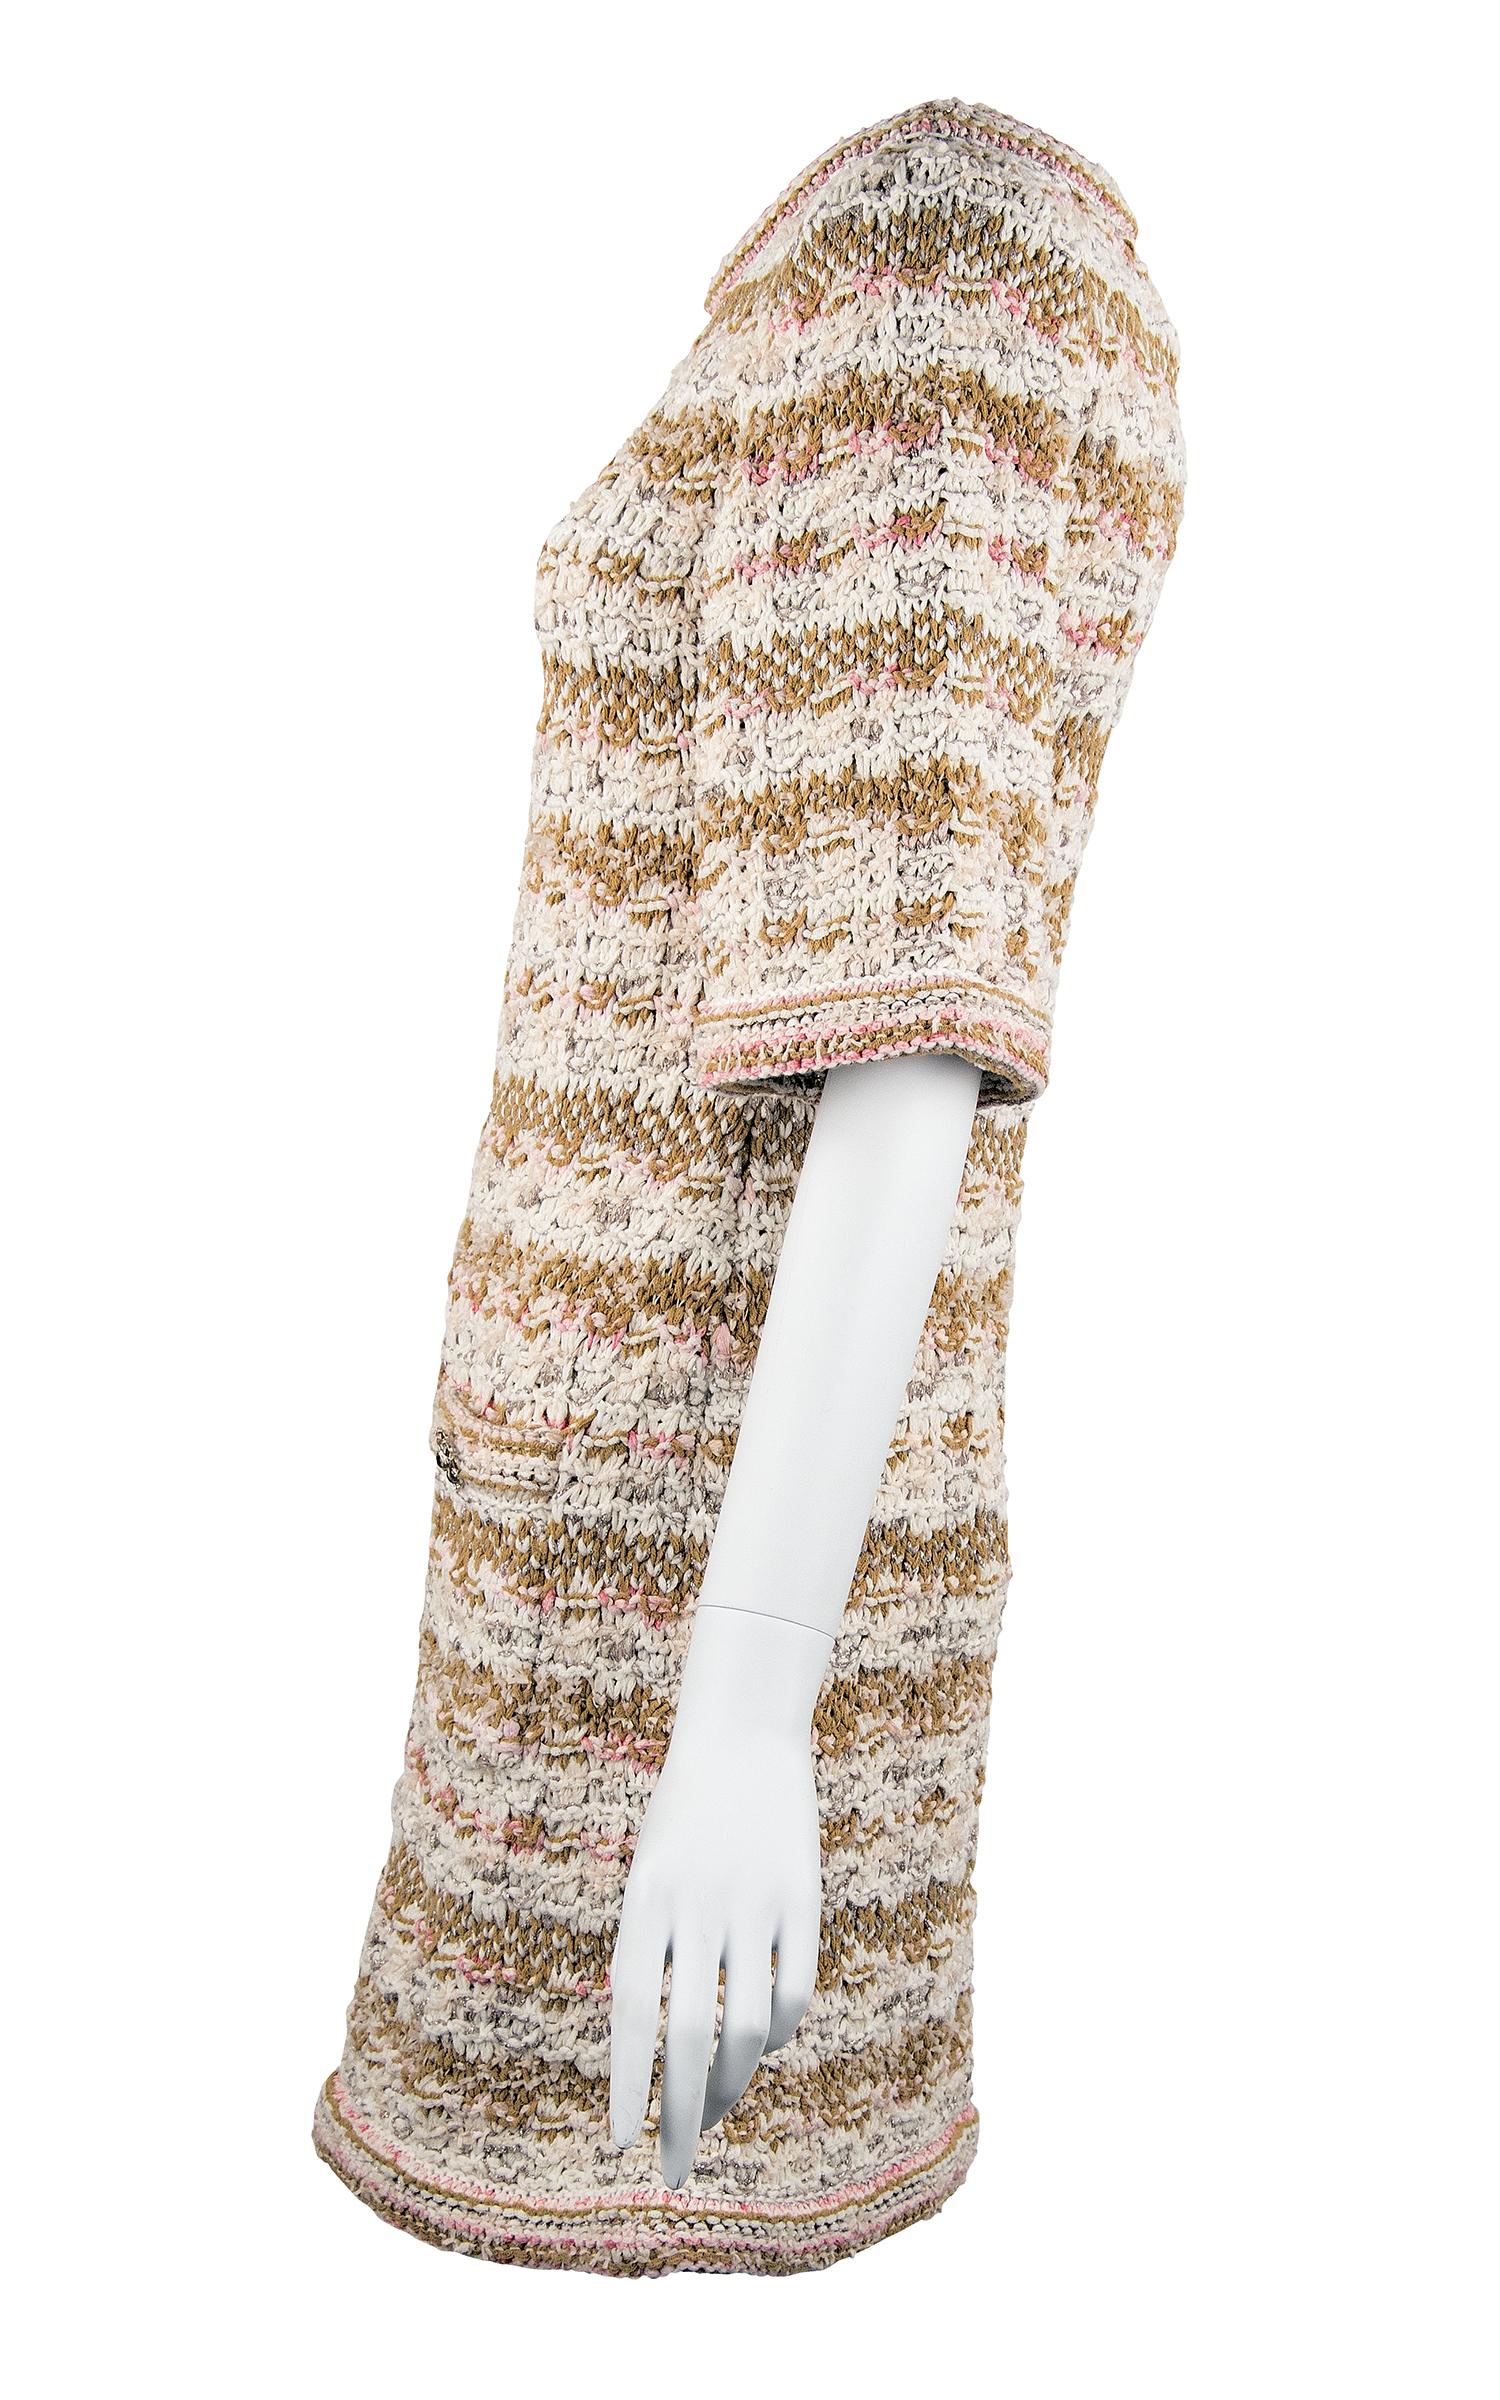 Amazing piece from the Chanel 2015 Resort collection.  Thick woven fabric composed of off white, light pink, beige and metallic knit yarns.  Features half sleeve and two front pockets with decorative silver buttons.

Condition: New with tags

Size: